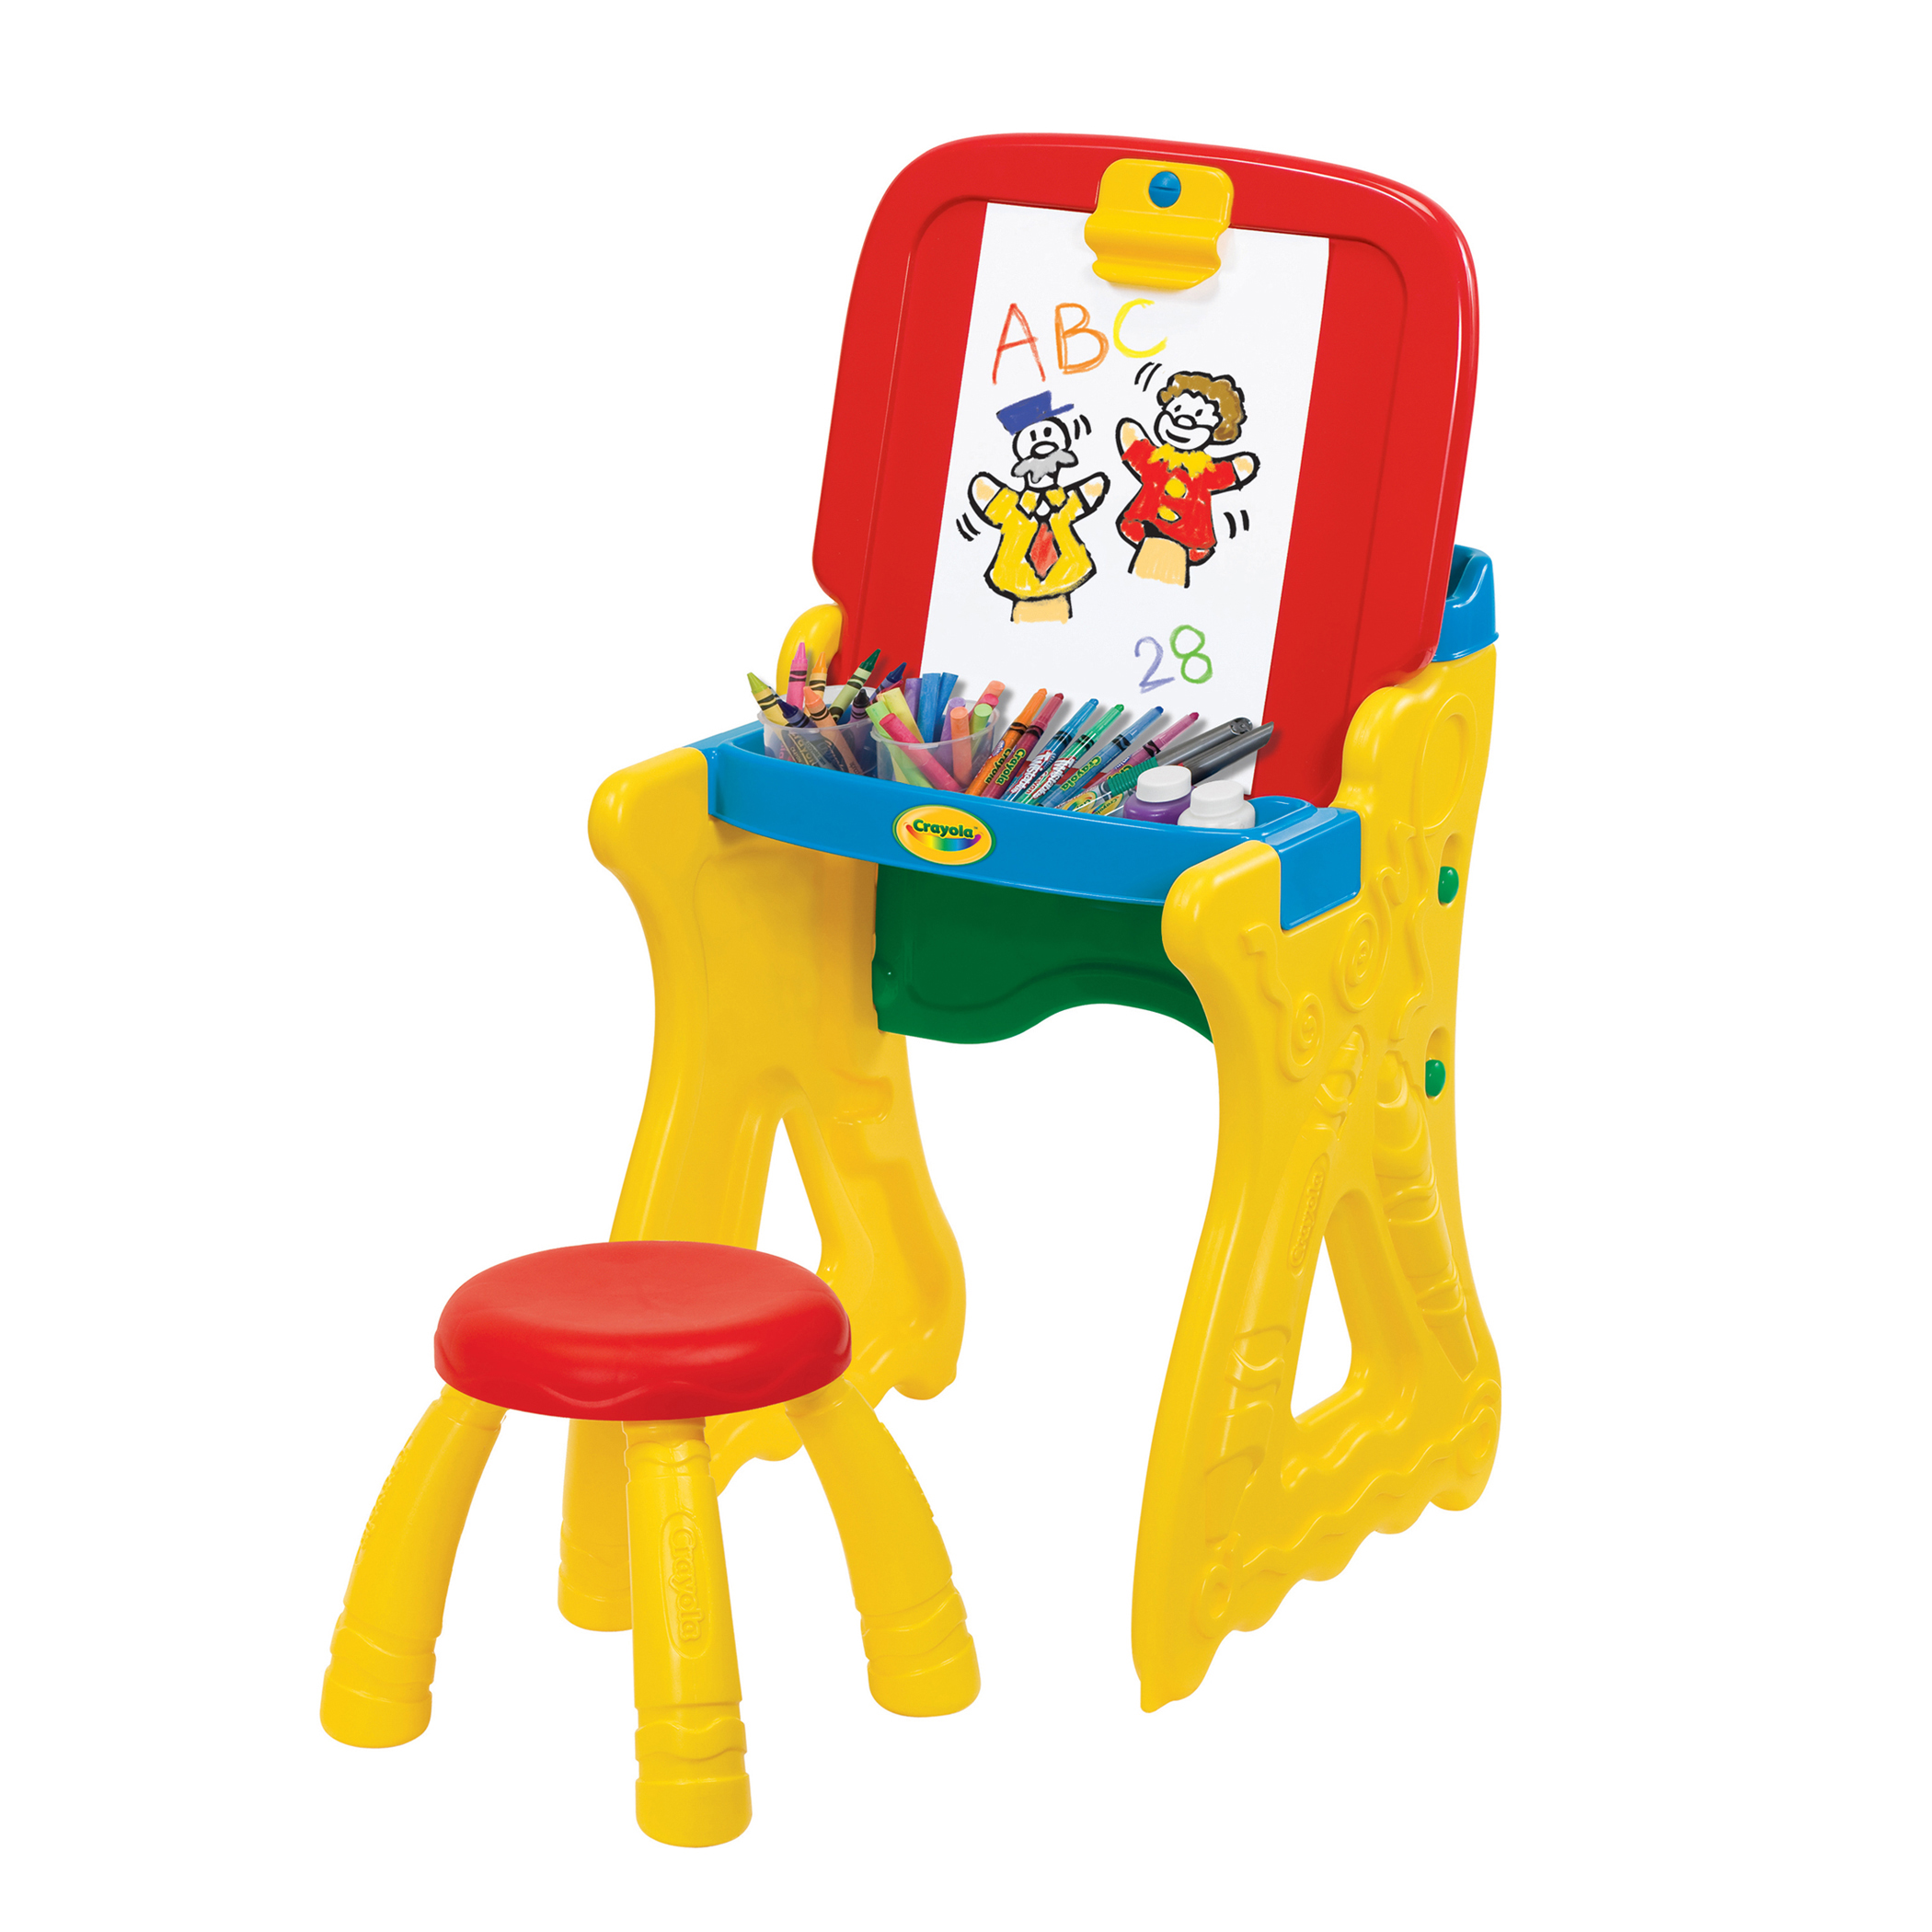 Crayola Play 'N Fold 2-in-1 Art Studio Easel Desk – Ages 3 Years and up - Multi in color - image 1 of 12